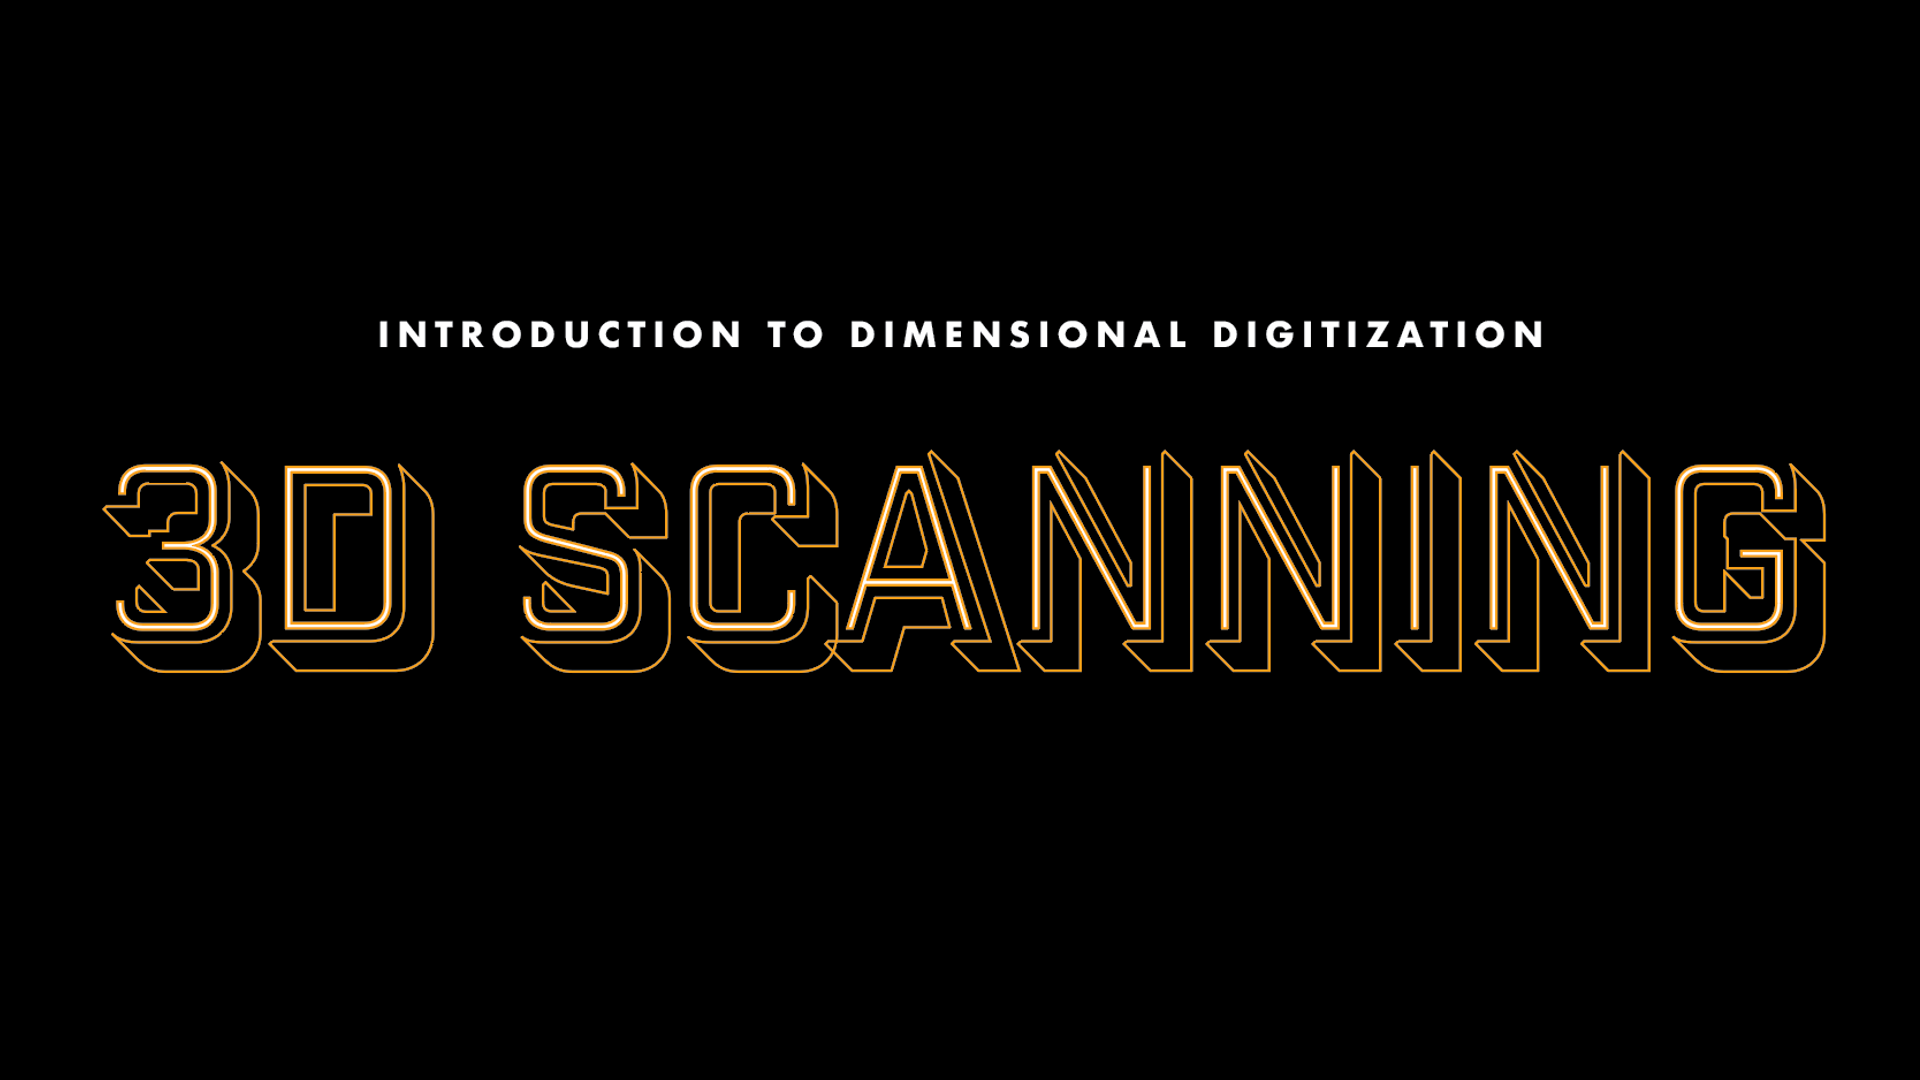 Introduction to 3D Scanning